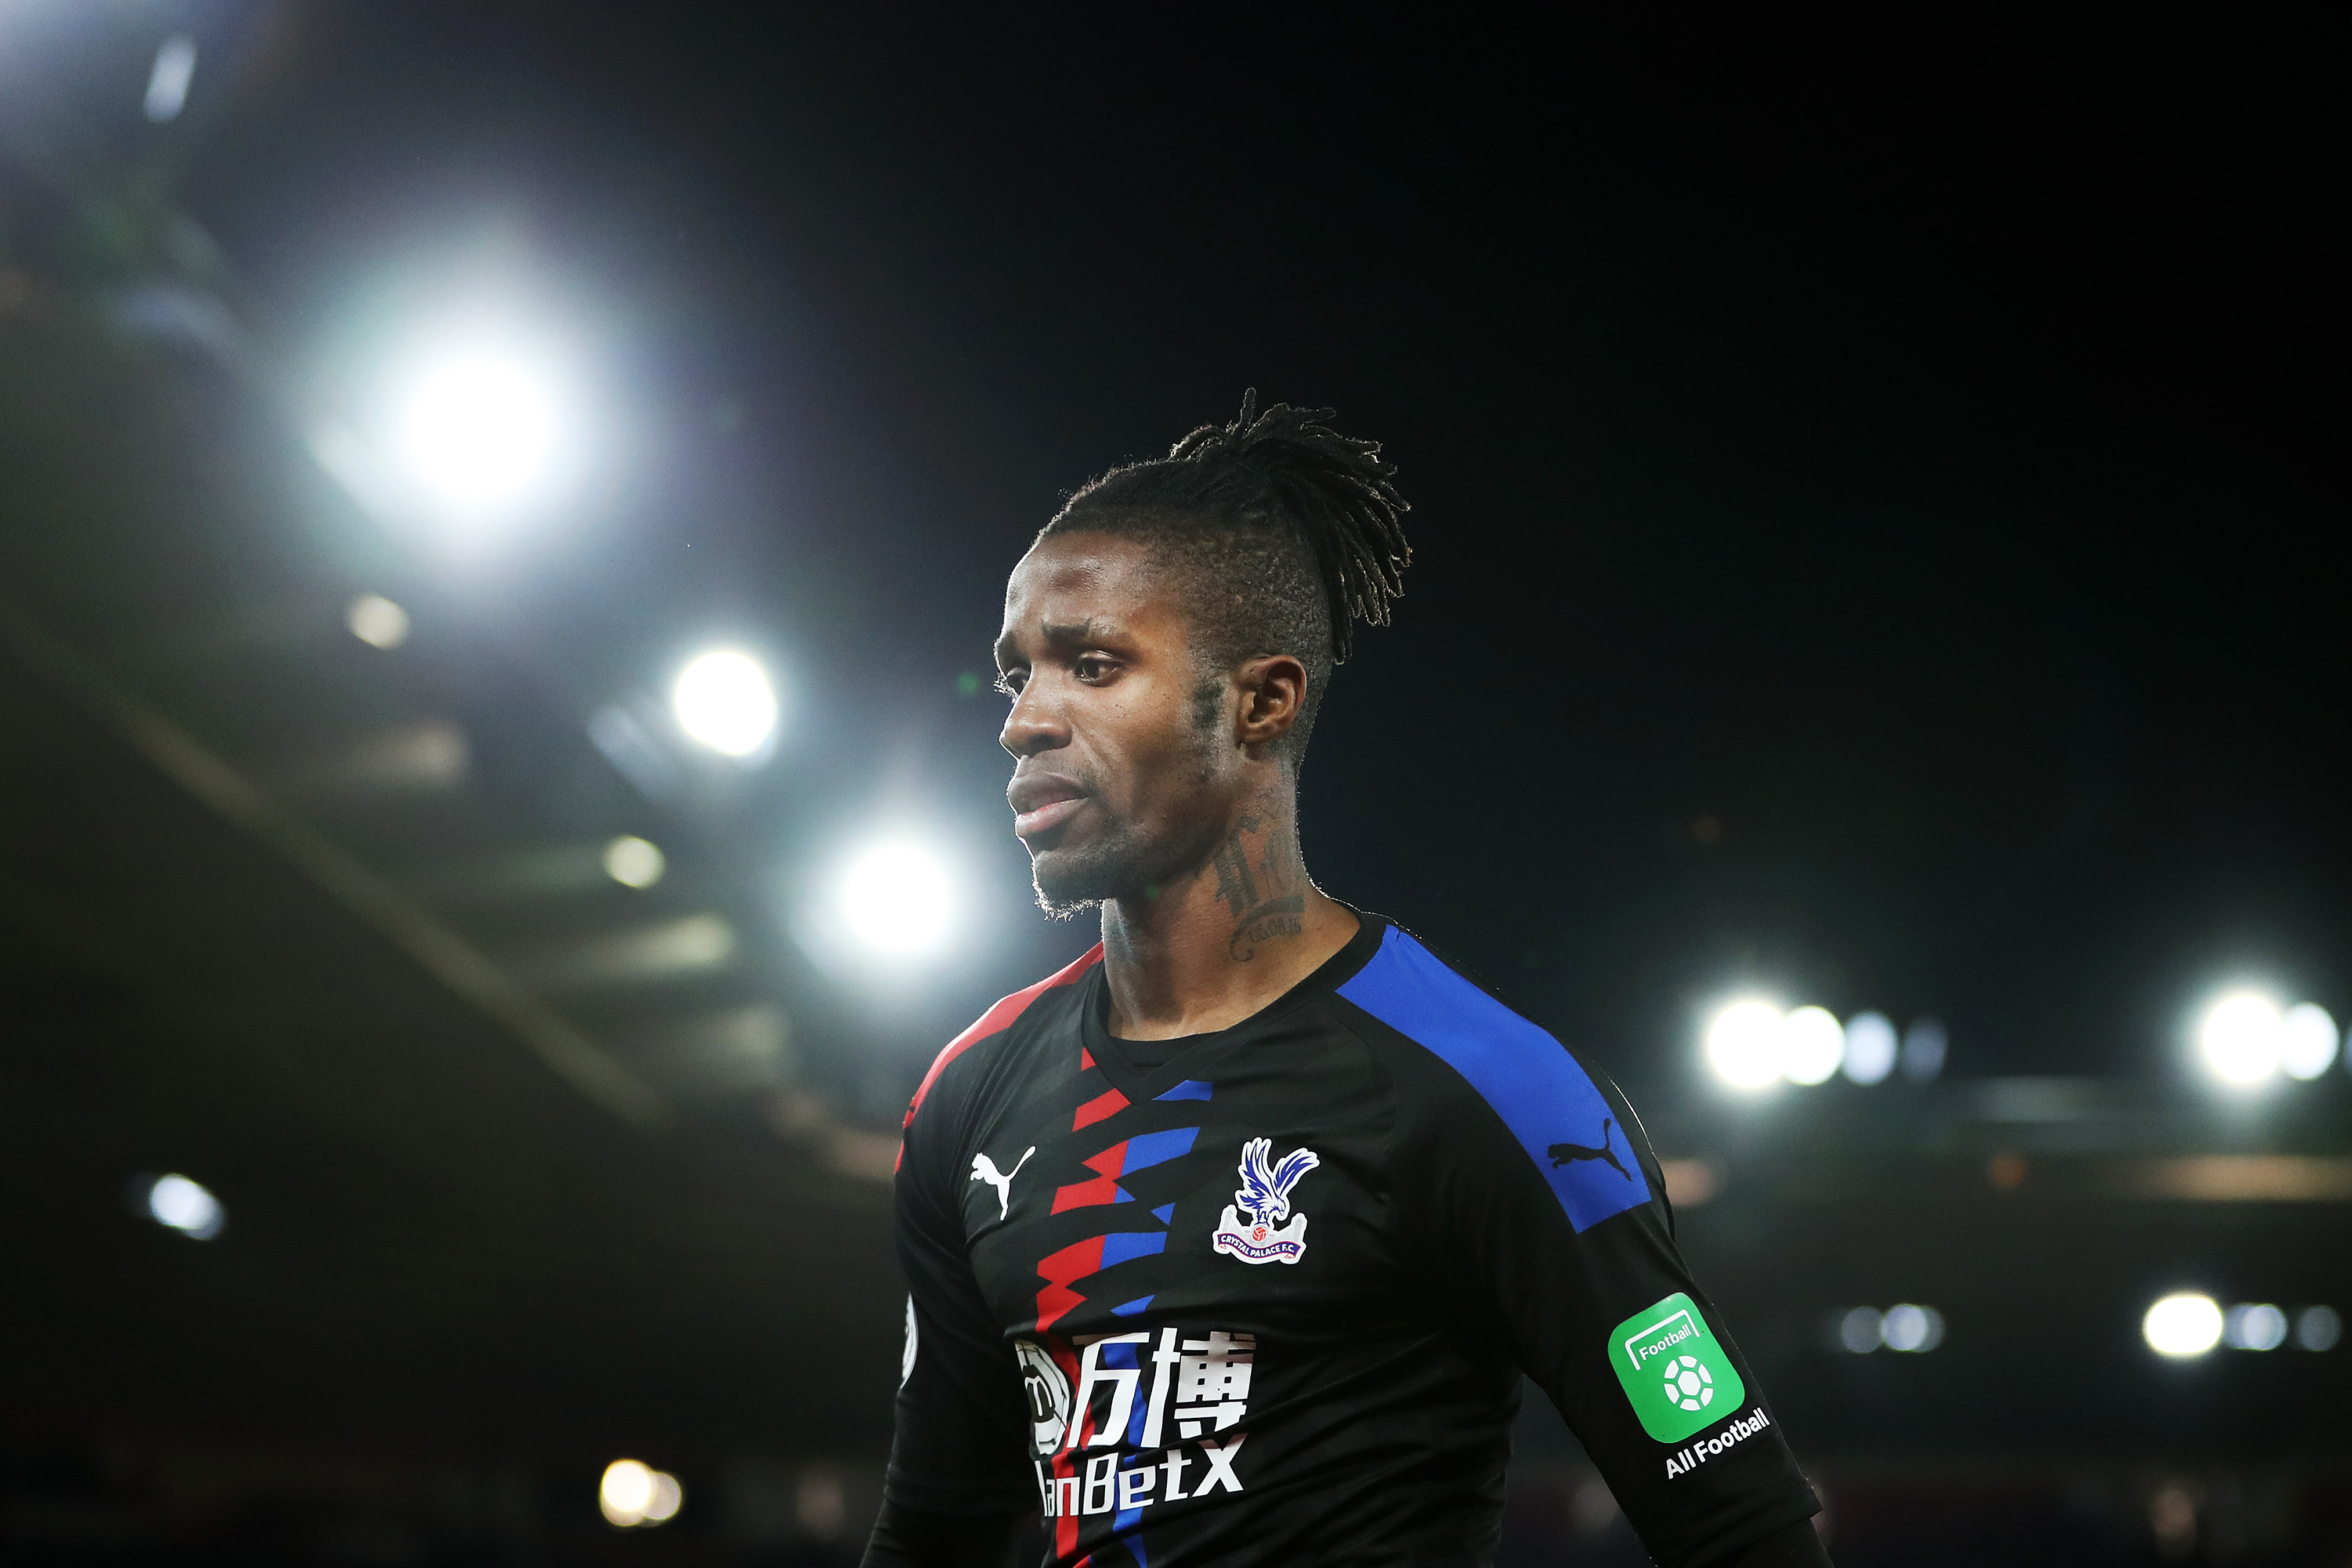 Zaha could be playing his last game for Crystal Palace (Photo by Naomi Baker/Getty Images)